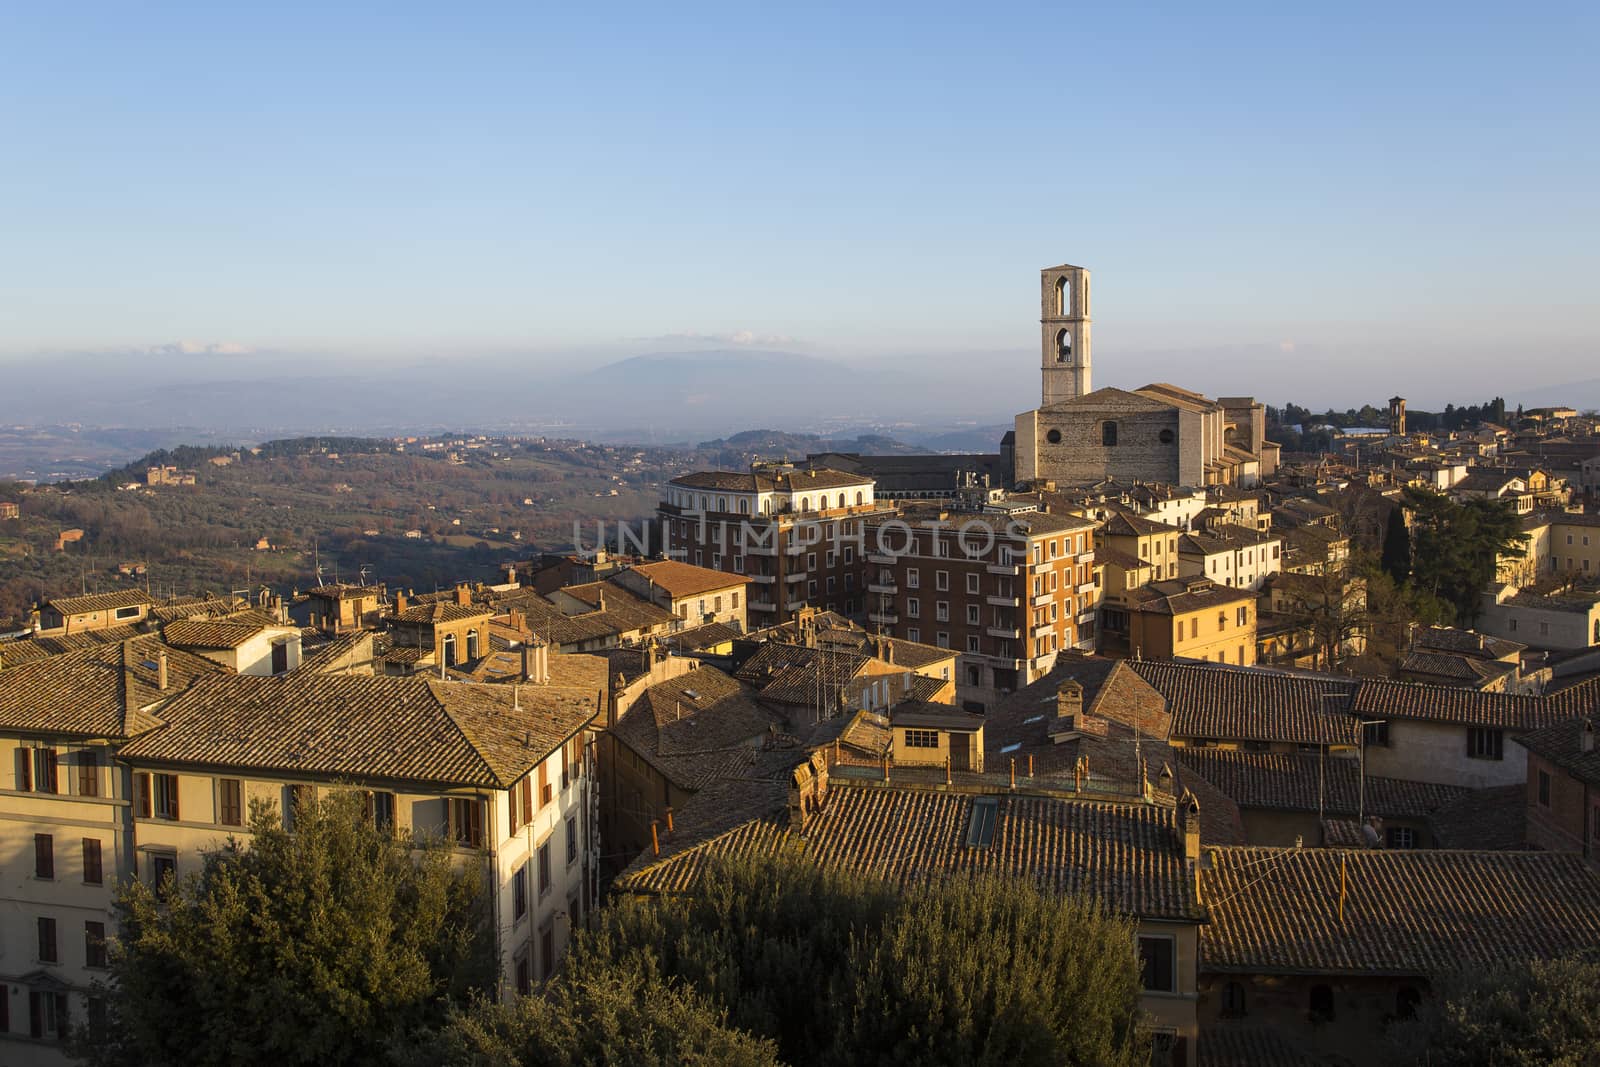 Panoramic view of the Umbrian city at dusk